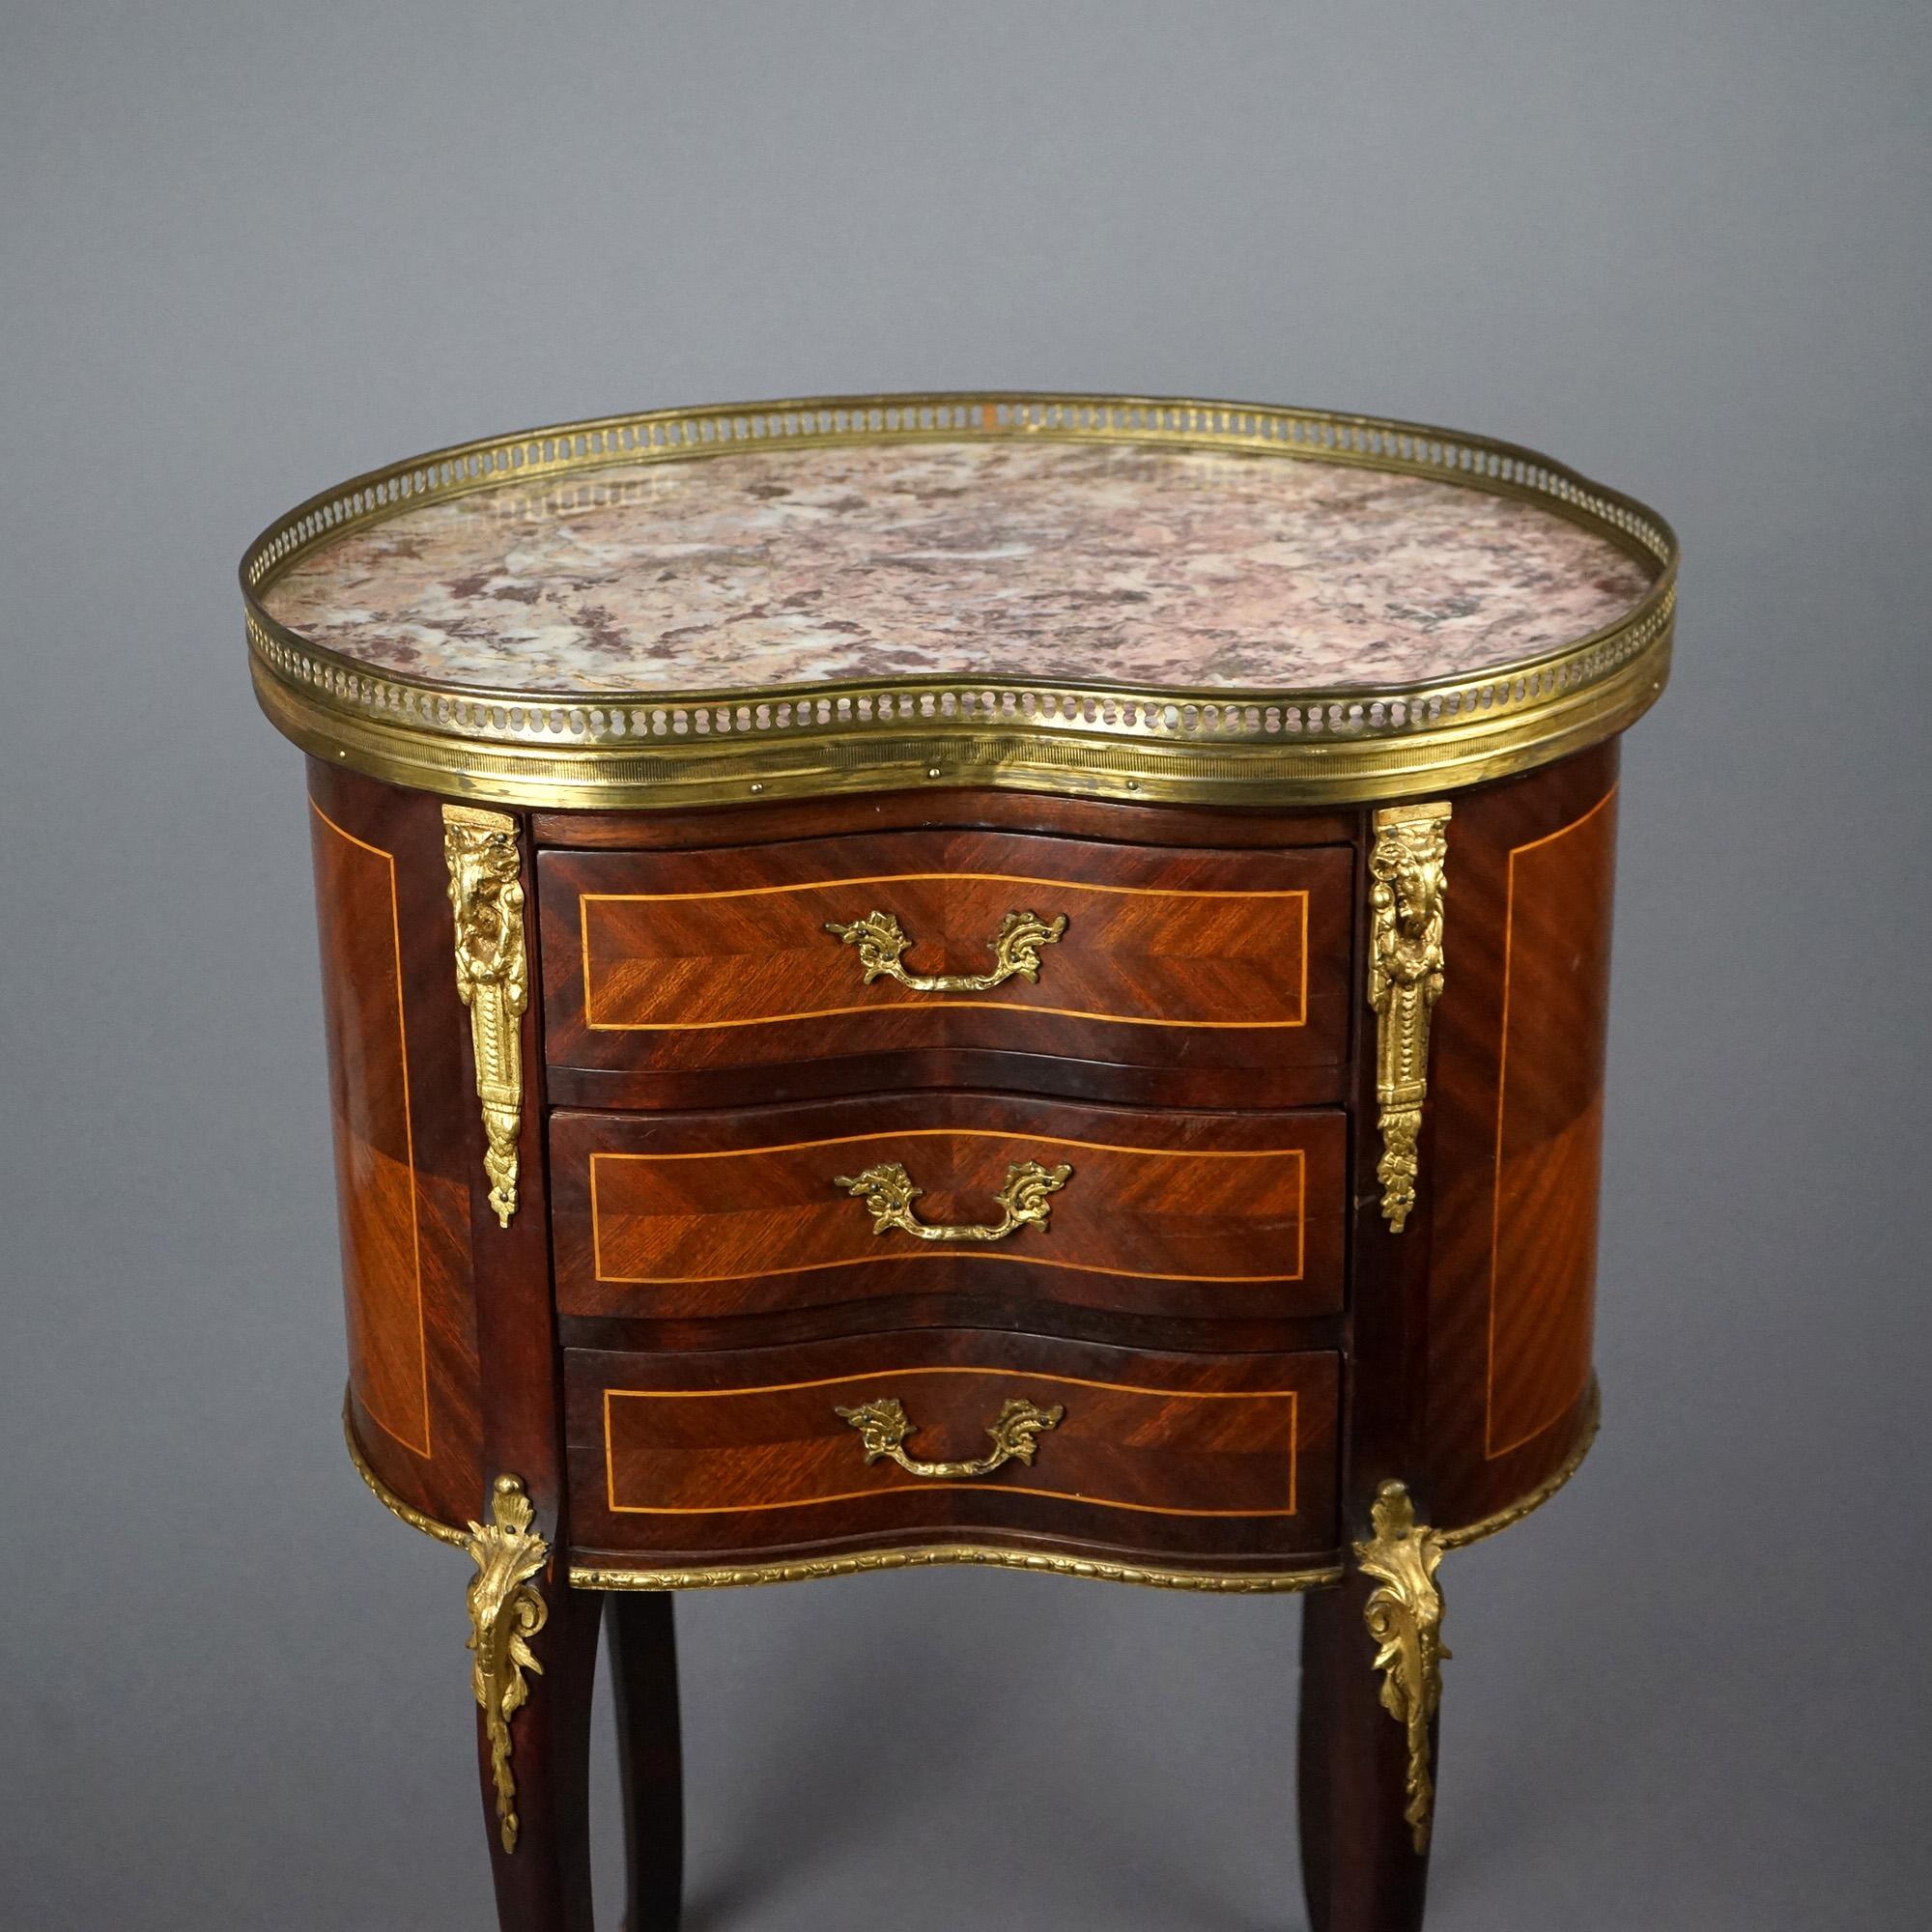 20th Century Antique French Mahogany, Kingwood, Marble & Ormolu Kidney Shaped Side Table For Sale